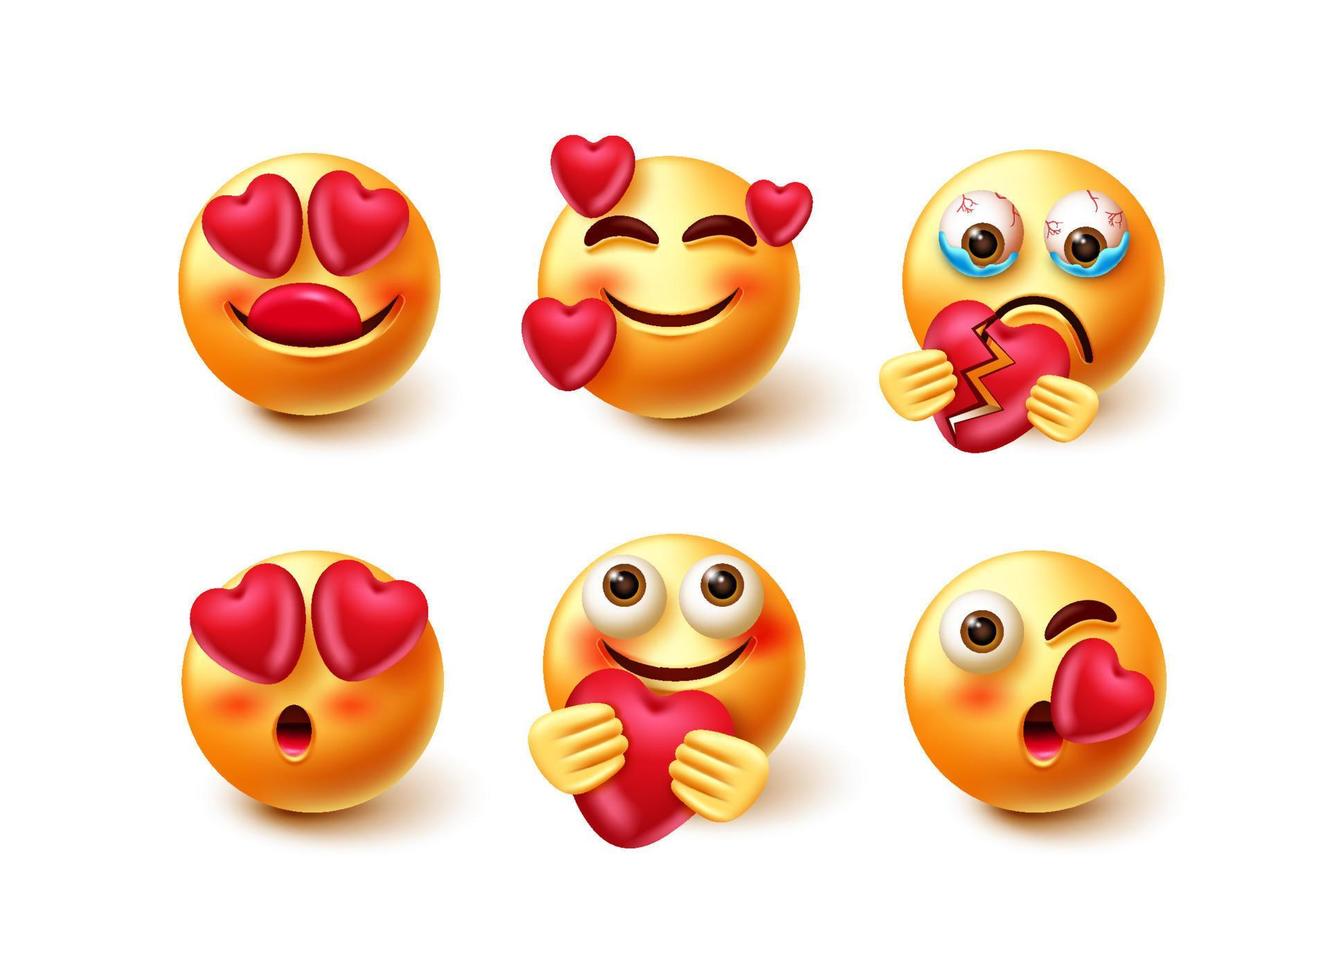 Emoticon in love emoji vector set. Emojis 3d character in love and broken expressions with pose like holding, crying and kissing for cute avatar collection design. Vector illustration